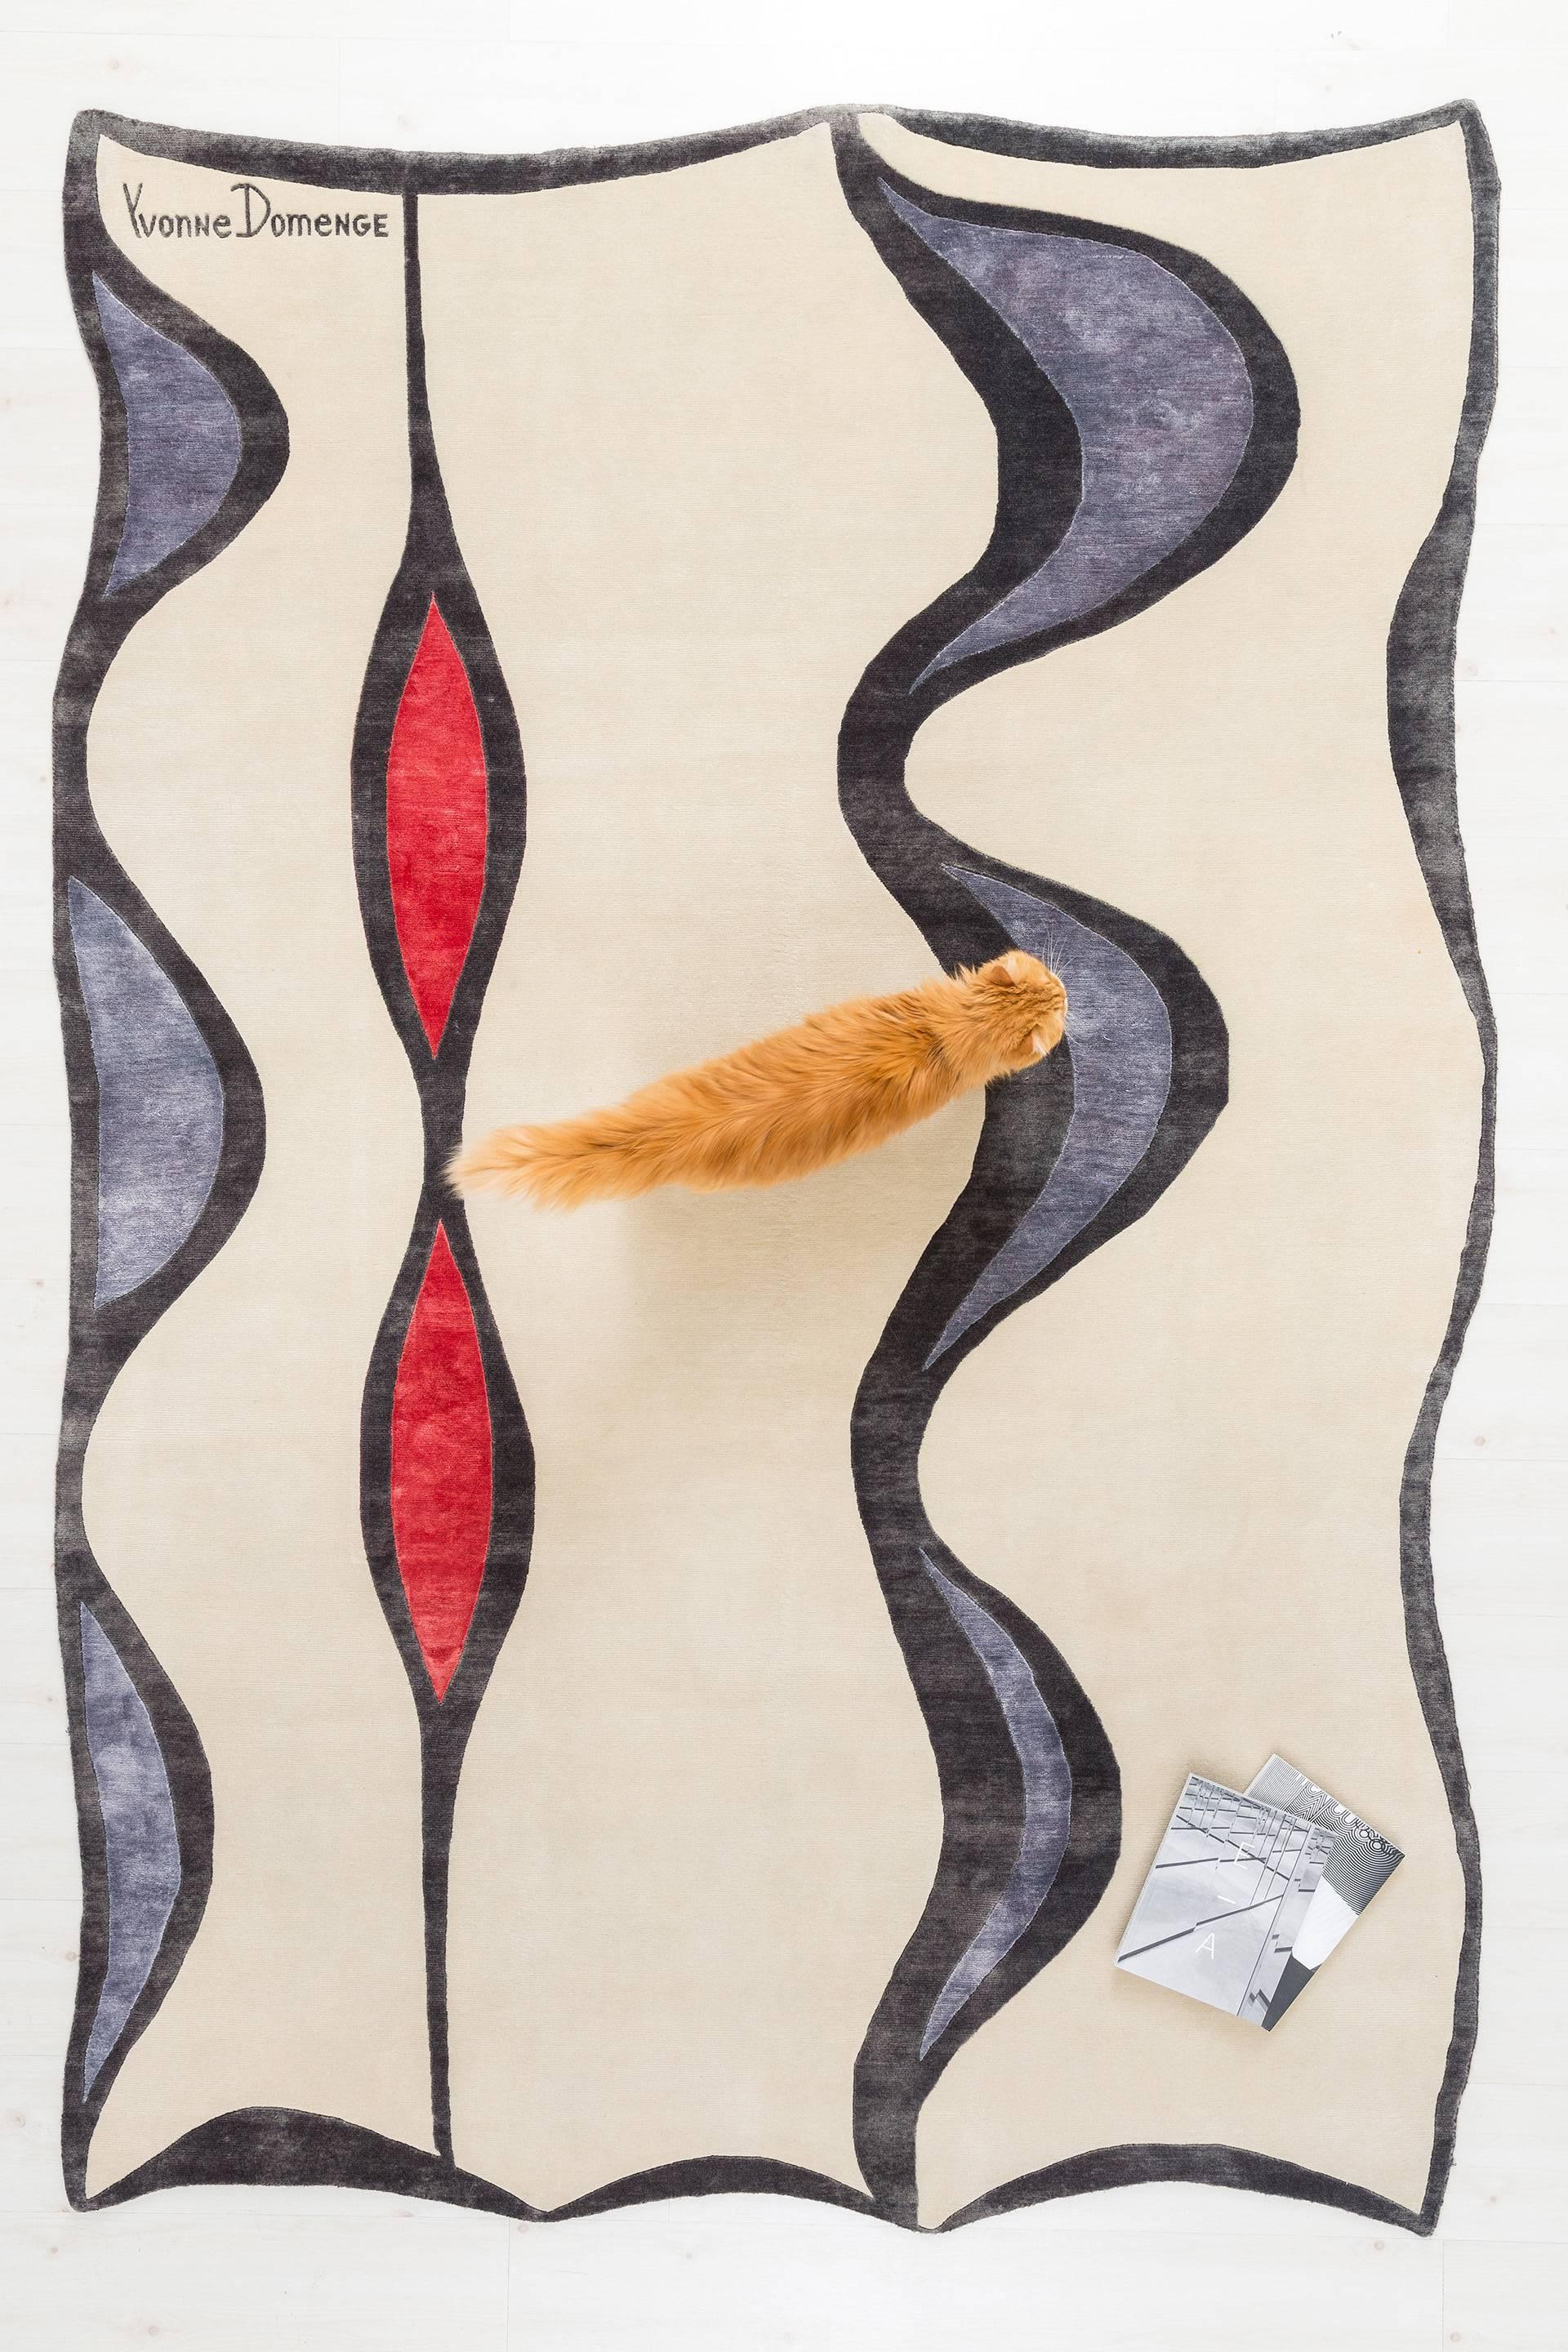 This is a Limited Edition rug made of premium New Zealand wool and silk. 

Established in 1921, Odabashian is a creative conduit for artists, designers, architects and creatives to learn, explore and create using traditional handmade rugmaking